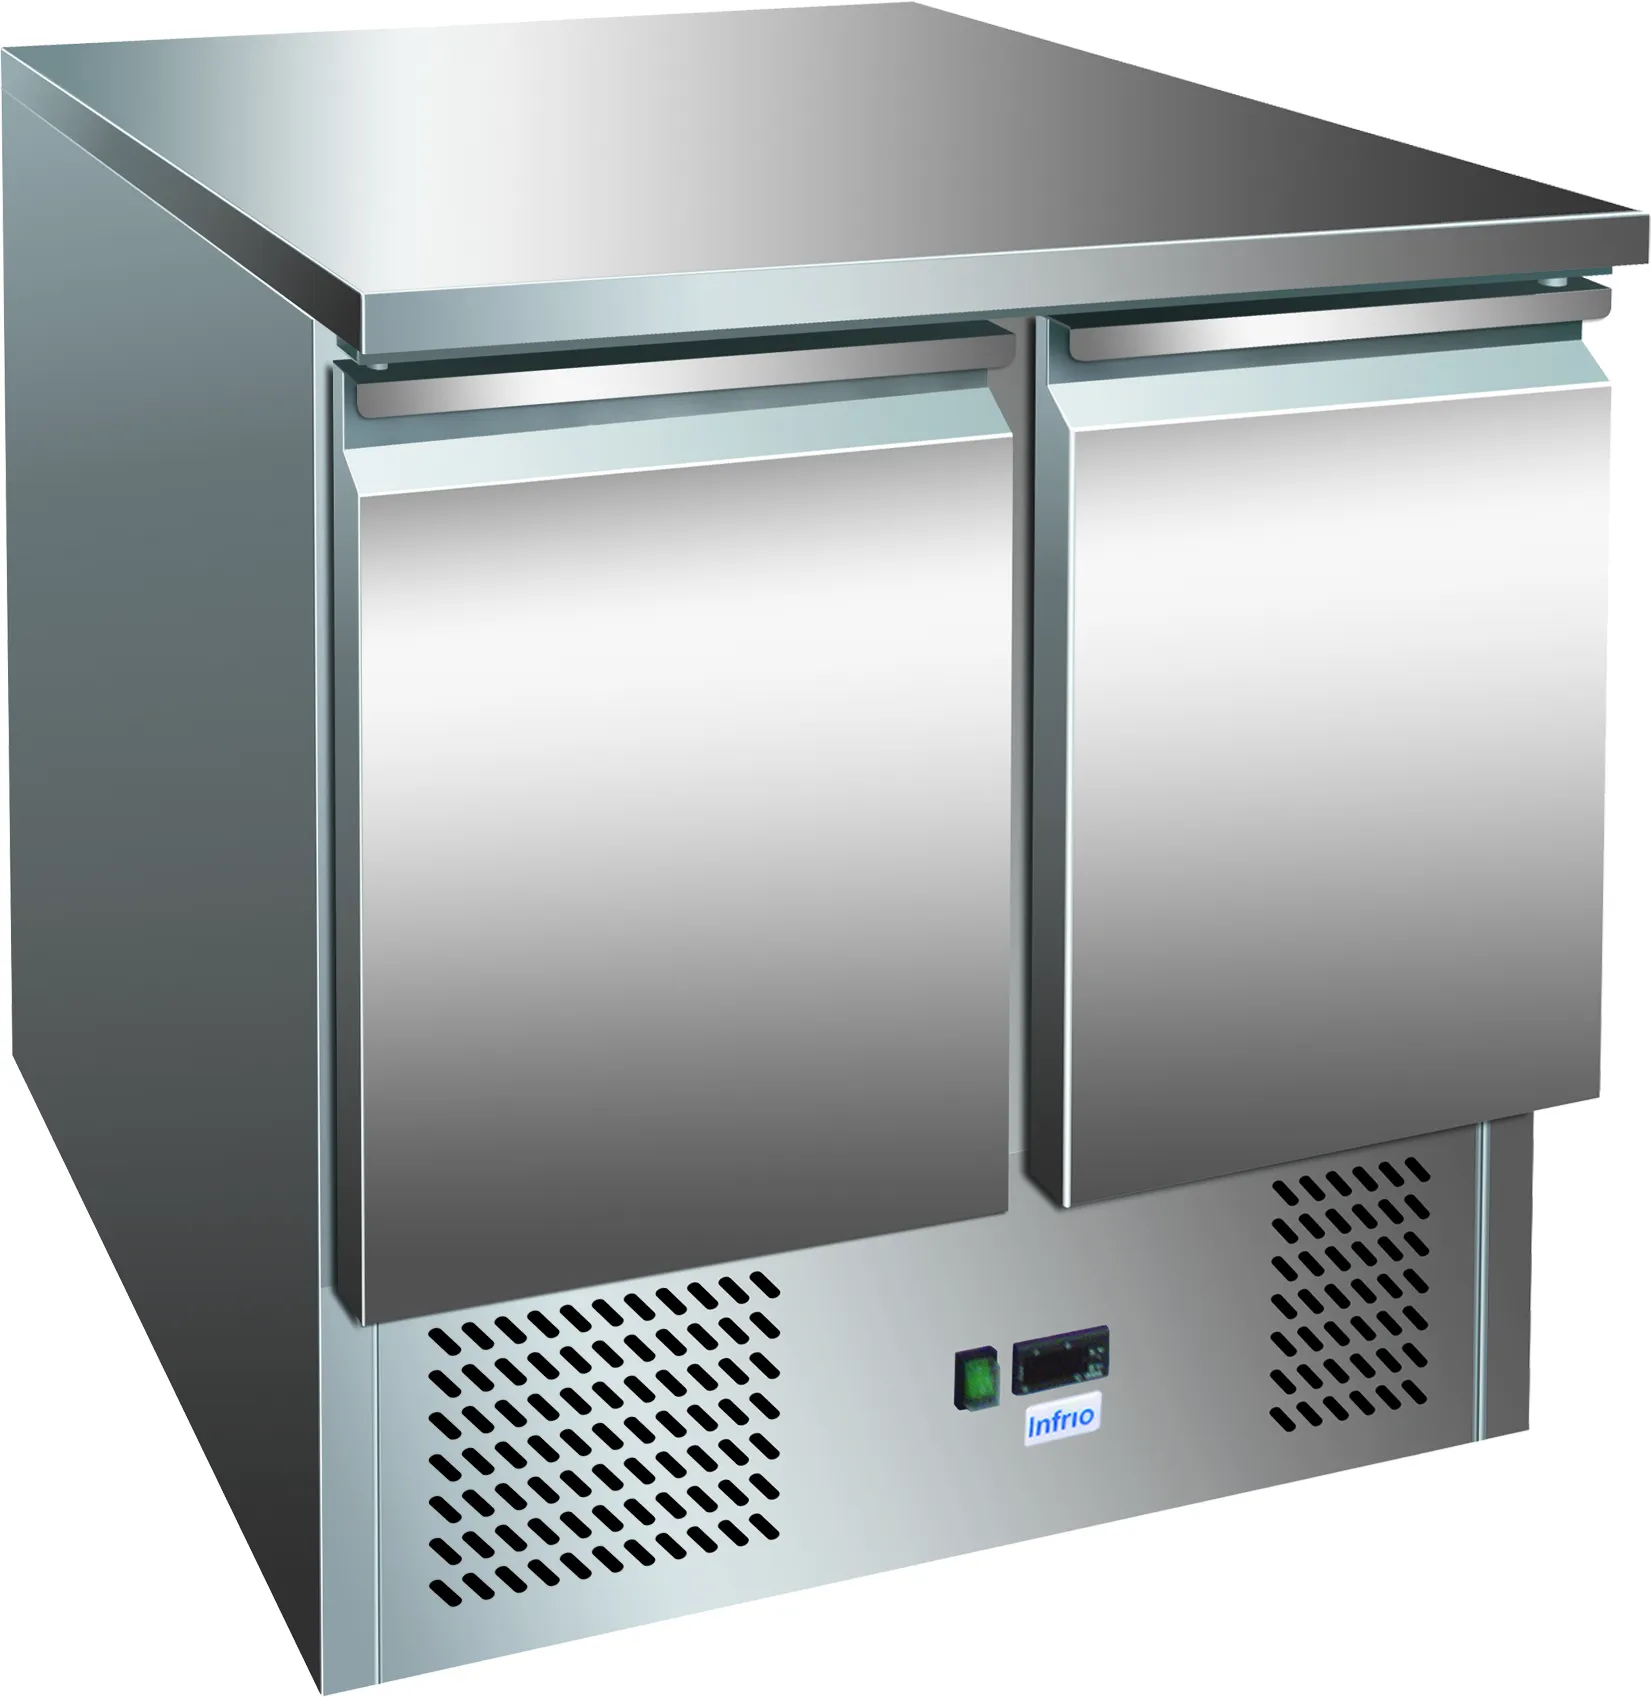 Infrio S90 Refrigerated Counter